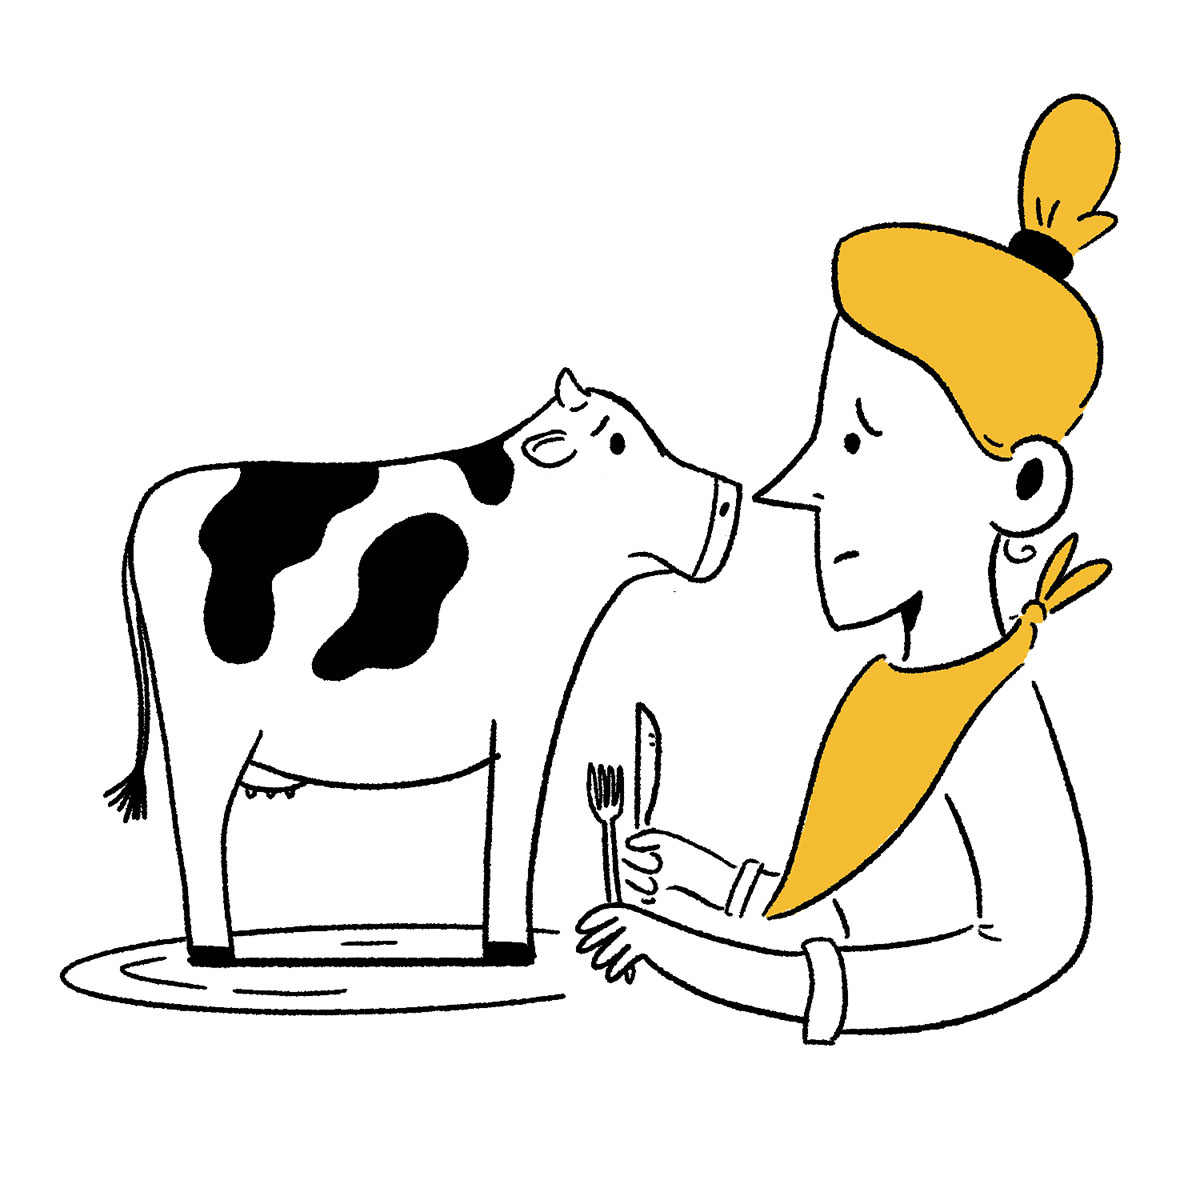 An illustration of a cow looking at person while standing on a plate